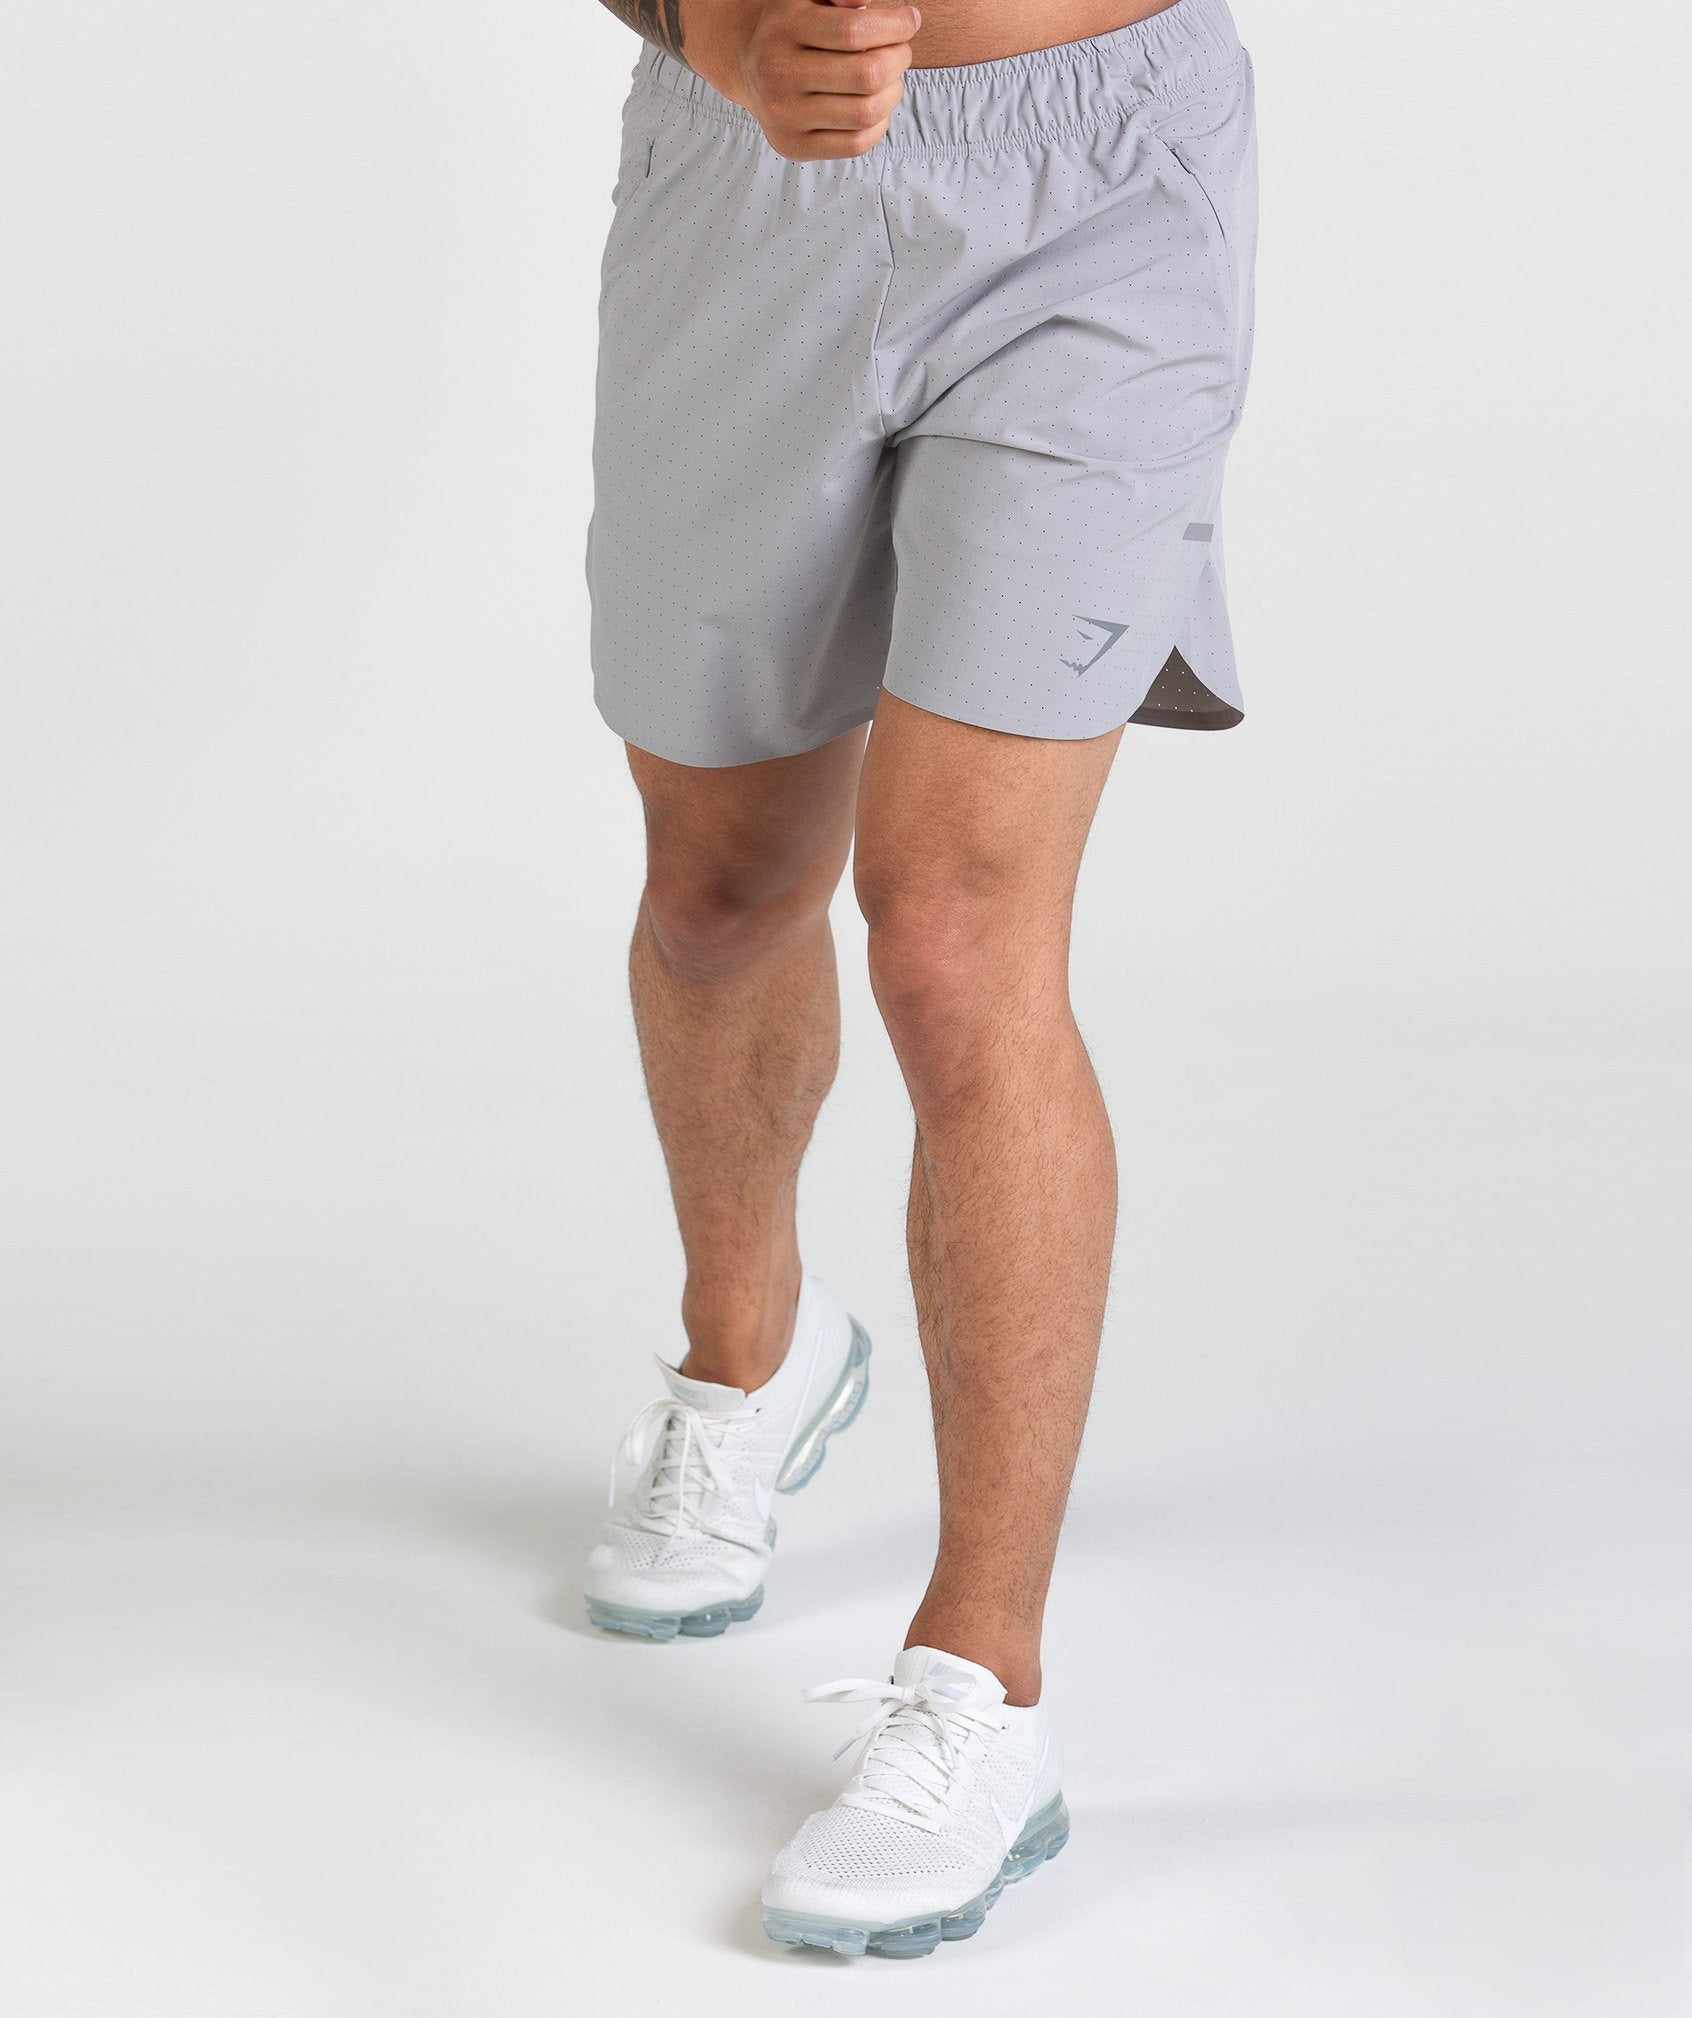 Perforated Shorts in Light Grey - view 1